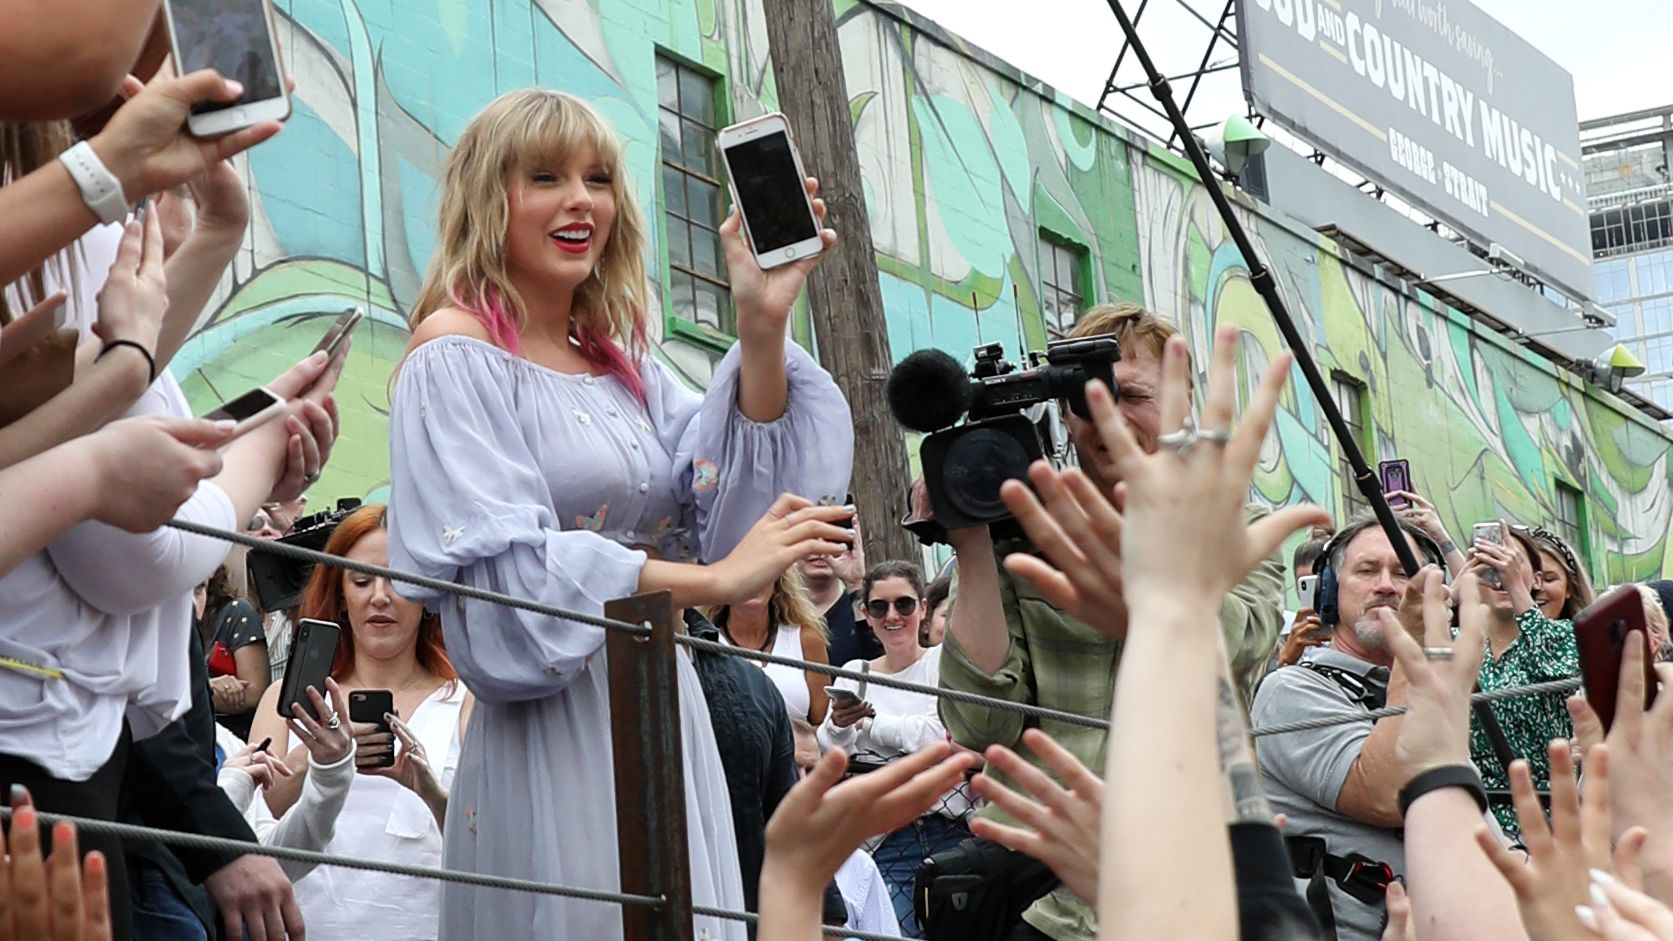 Taylor Swift surprises fans at the new Kelsey Montague "What Lifts You Up" Mural on April 25, 2019 in Nashville, Tennessee.